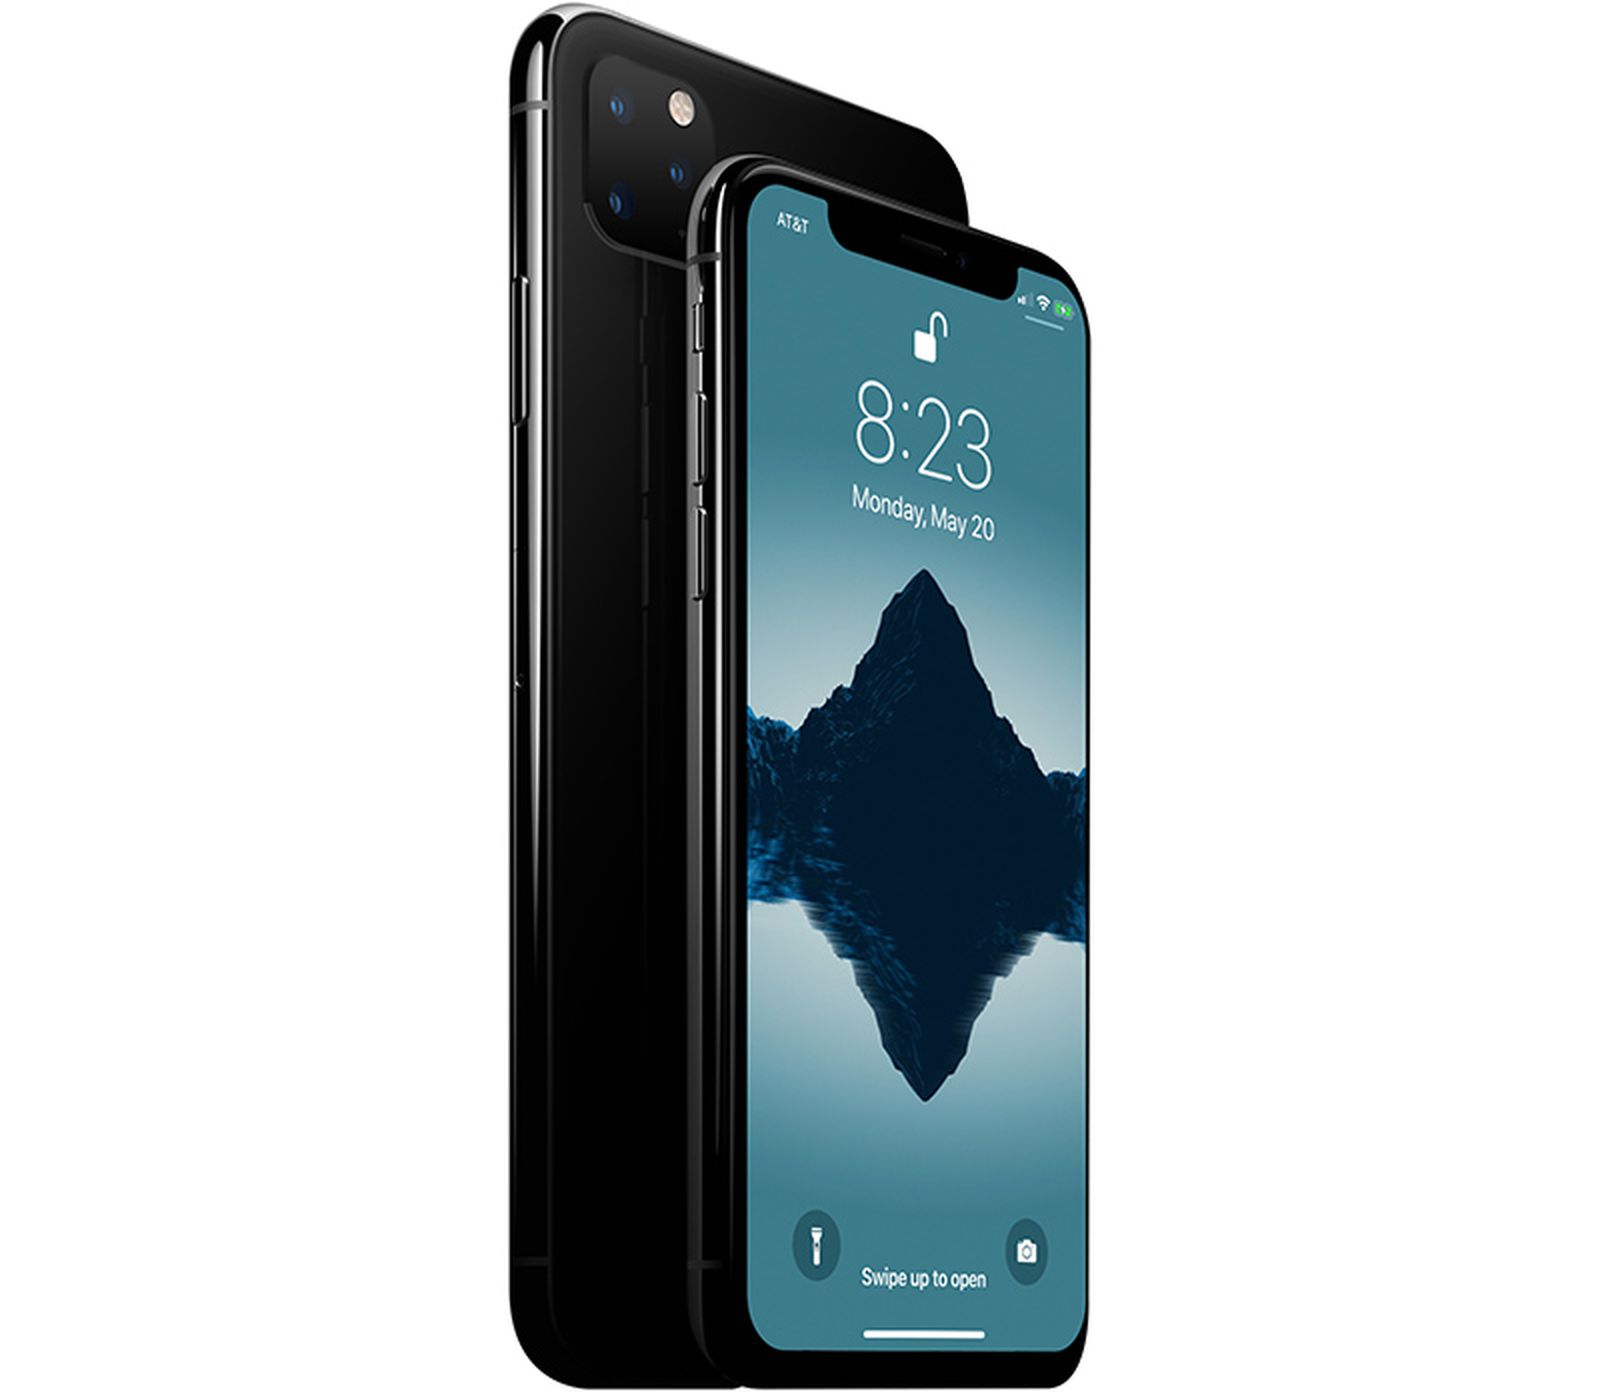 wakker worden bladeren Anoi iPhone 11 Pro' Rumored to Be Name of High-End 2019 iPhone With Triple-Lens  Camera - MacRumors